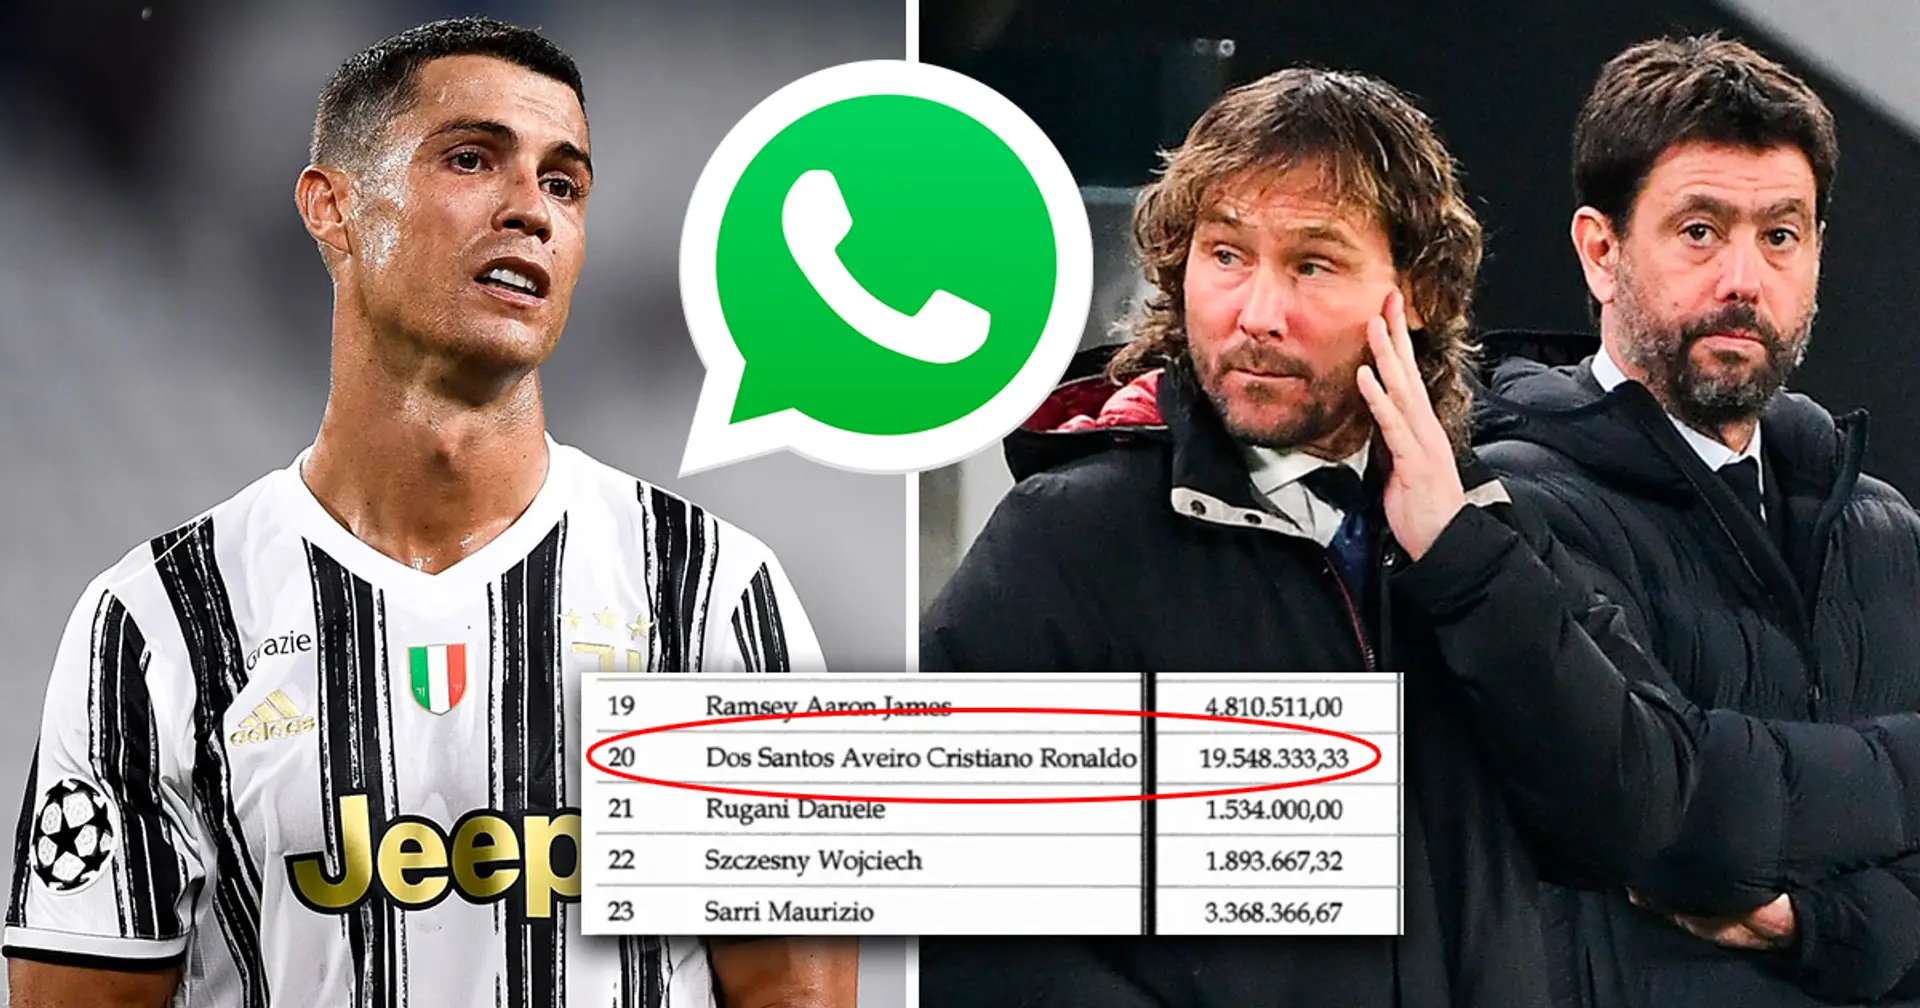 Cristiano Ronaldo could be banned for 30 days after Juventus WhatsApp chat leaked